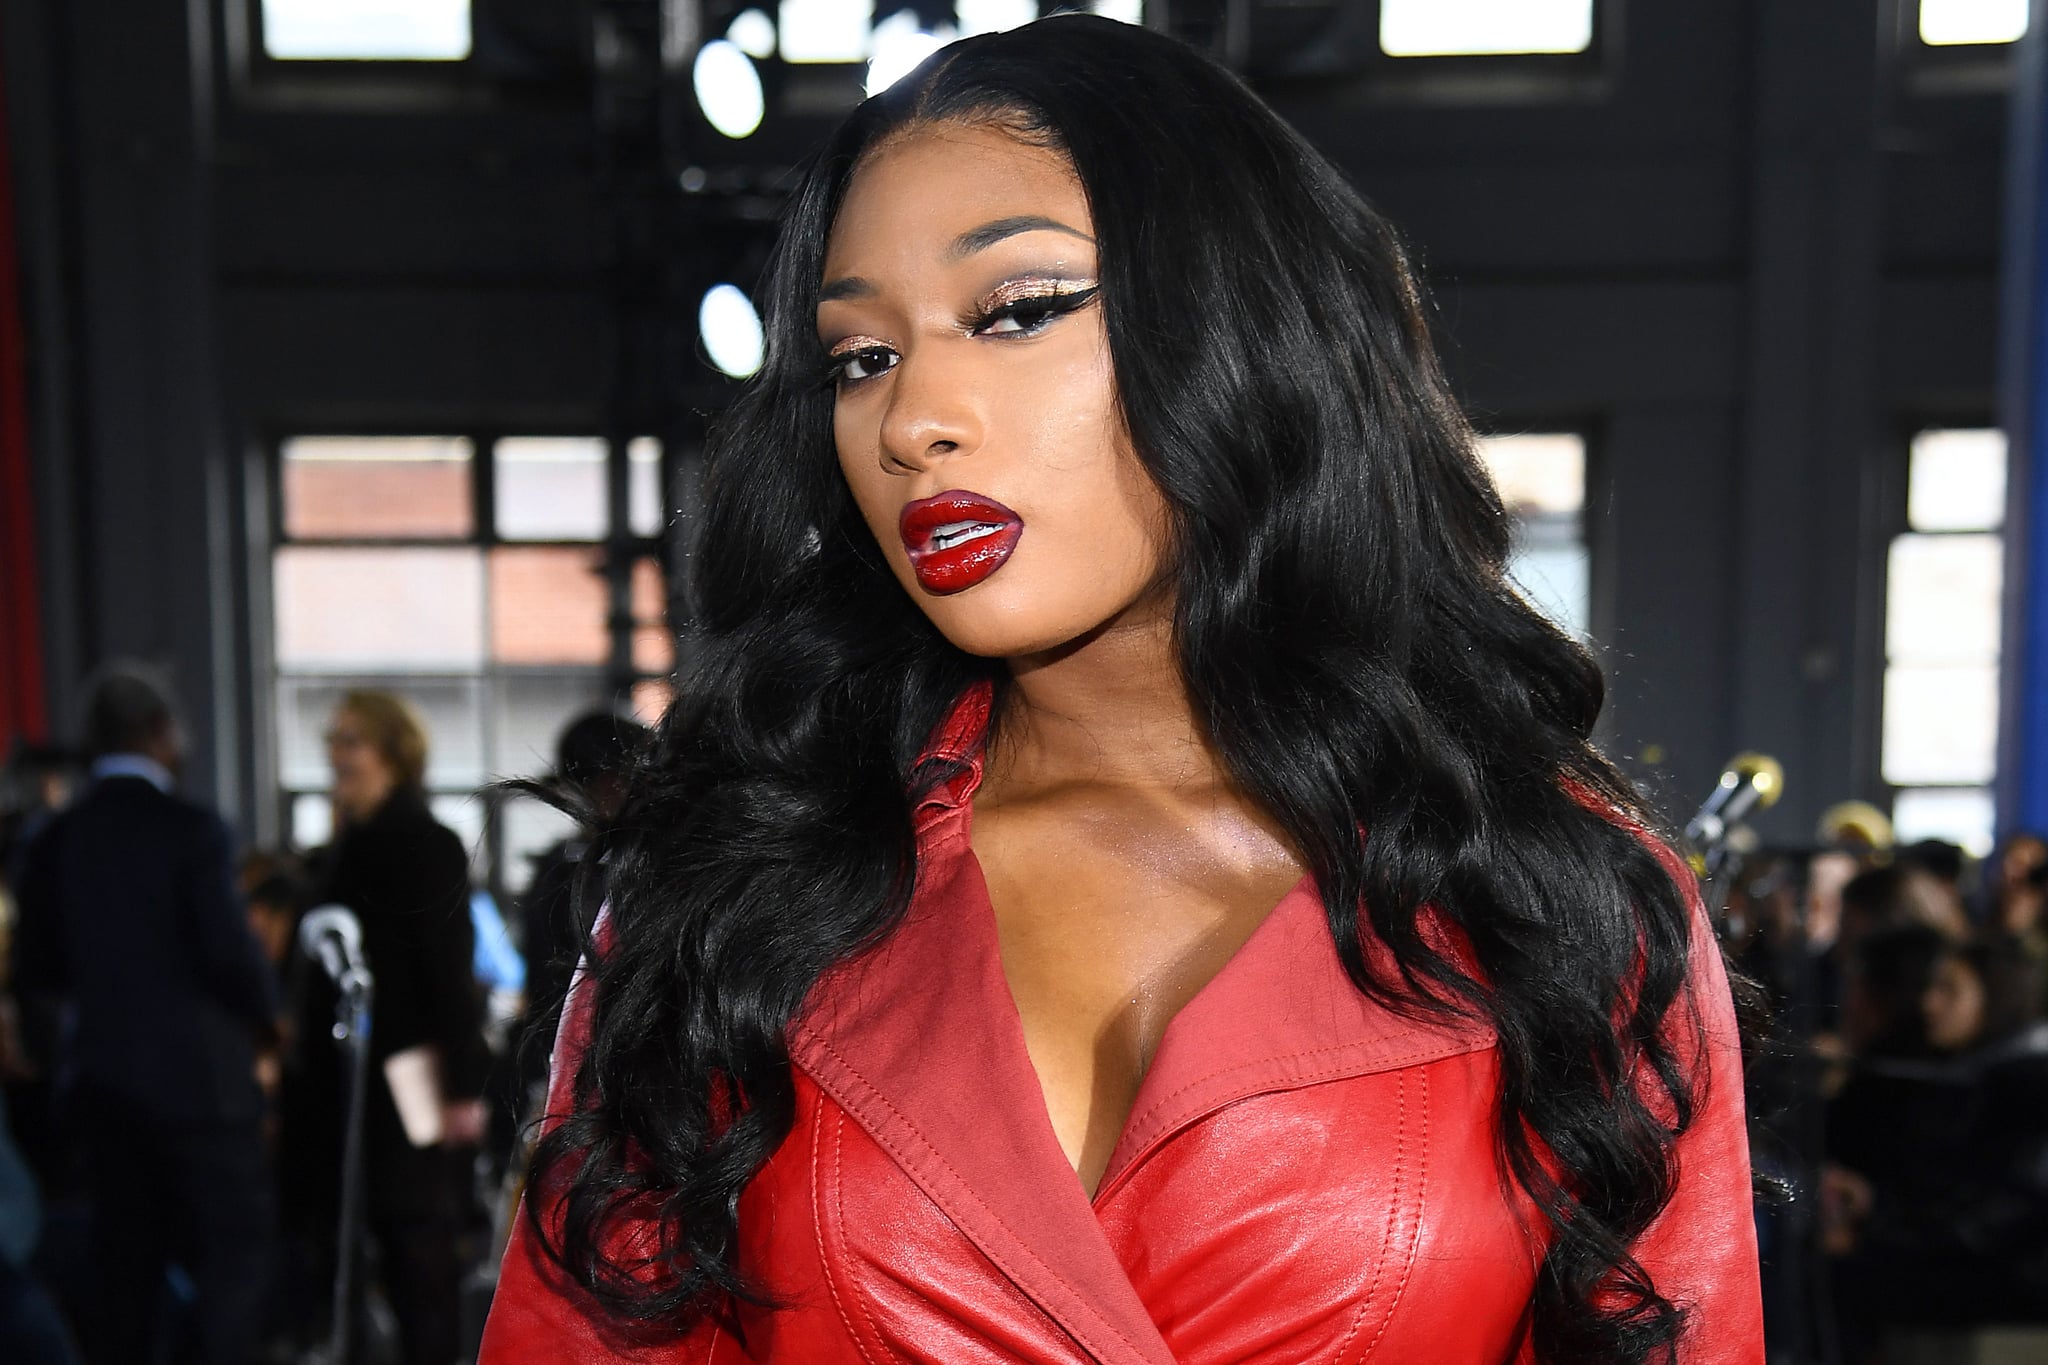 NEW YORK, NEW YORK - FEBRUARY 11: Megan Thee Stallion attends the Coach 1941 fashion show during February 2020 - New York Fashion Week on February 11, 2020 in New York City. (Photo by Dimitrios Kambouris/Getty Images for NYFW: The Shows)